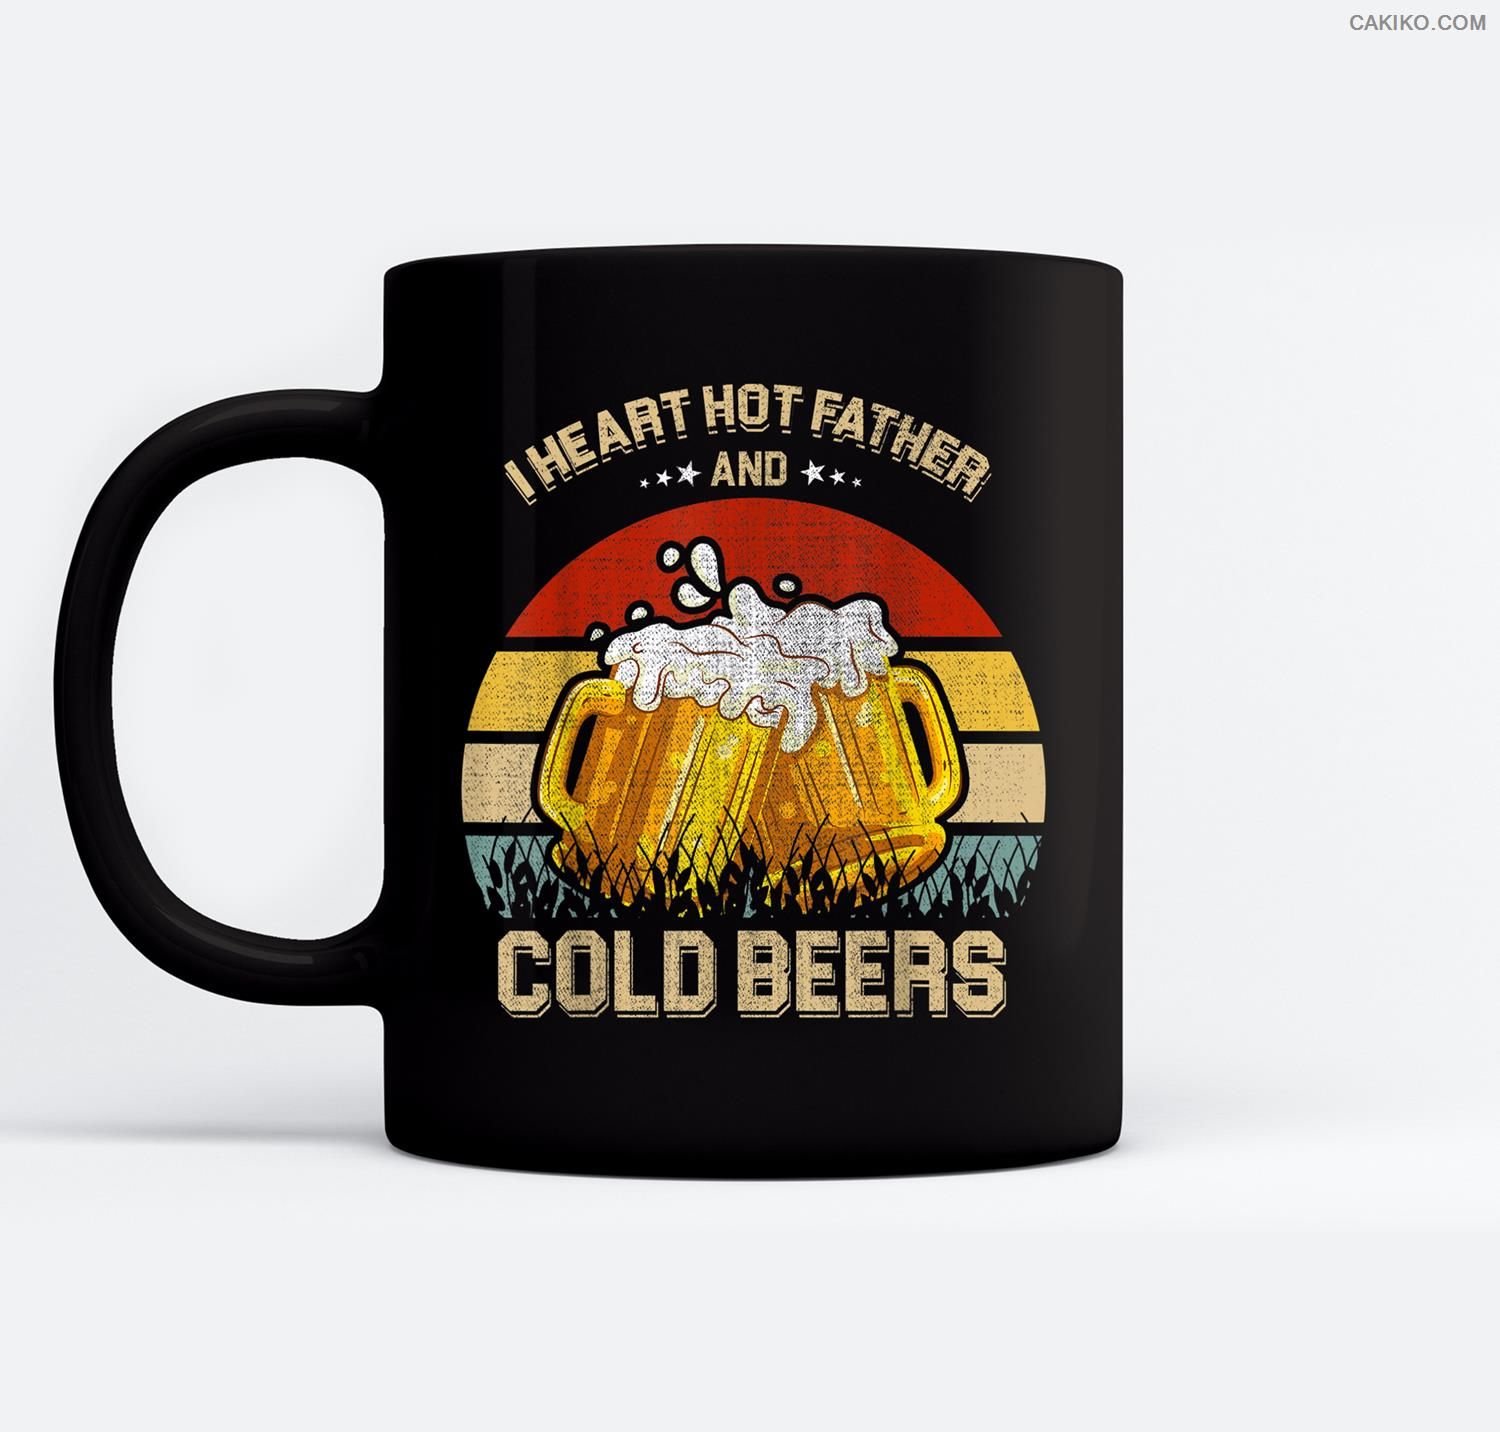 I Heard Hot Father And Cold Beer Retro Vintage Ceramic Coffee Black Mugs